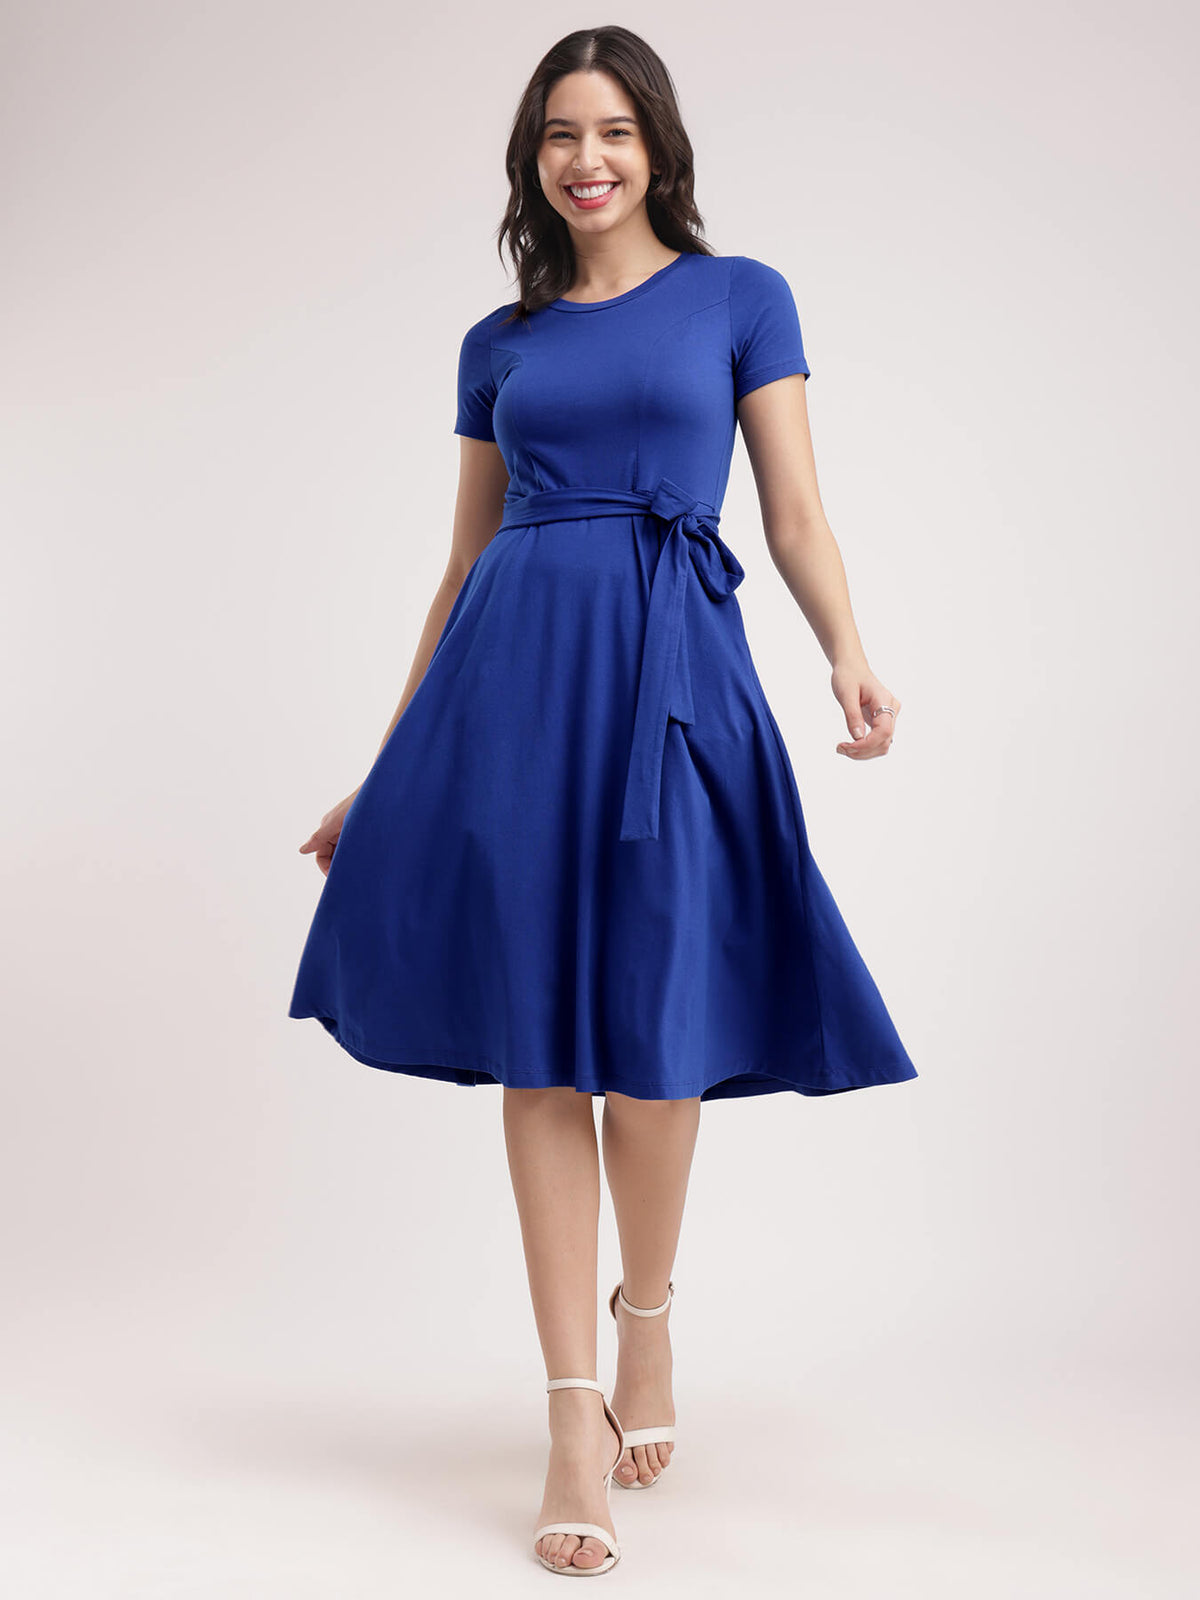 Cotton Knitted Fit And Flare Dress - Royal Blue